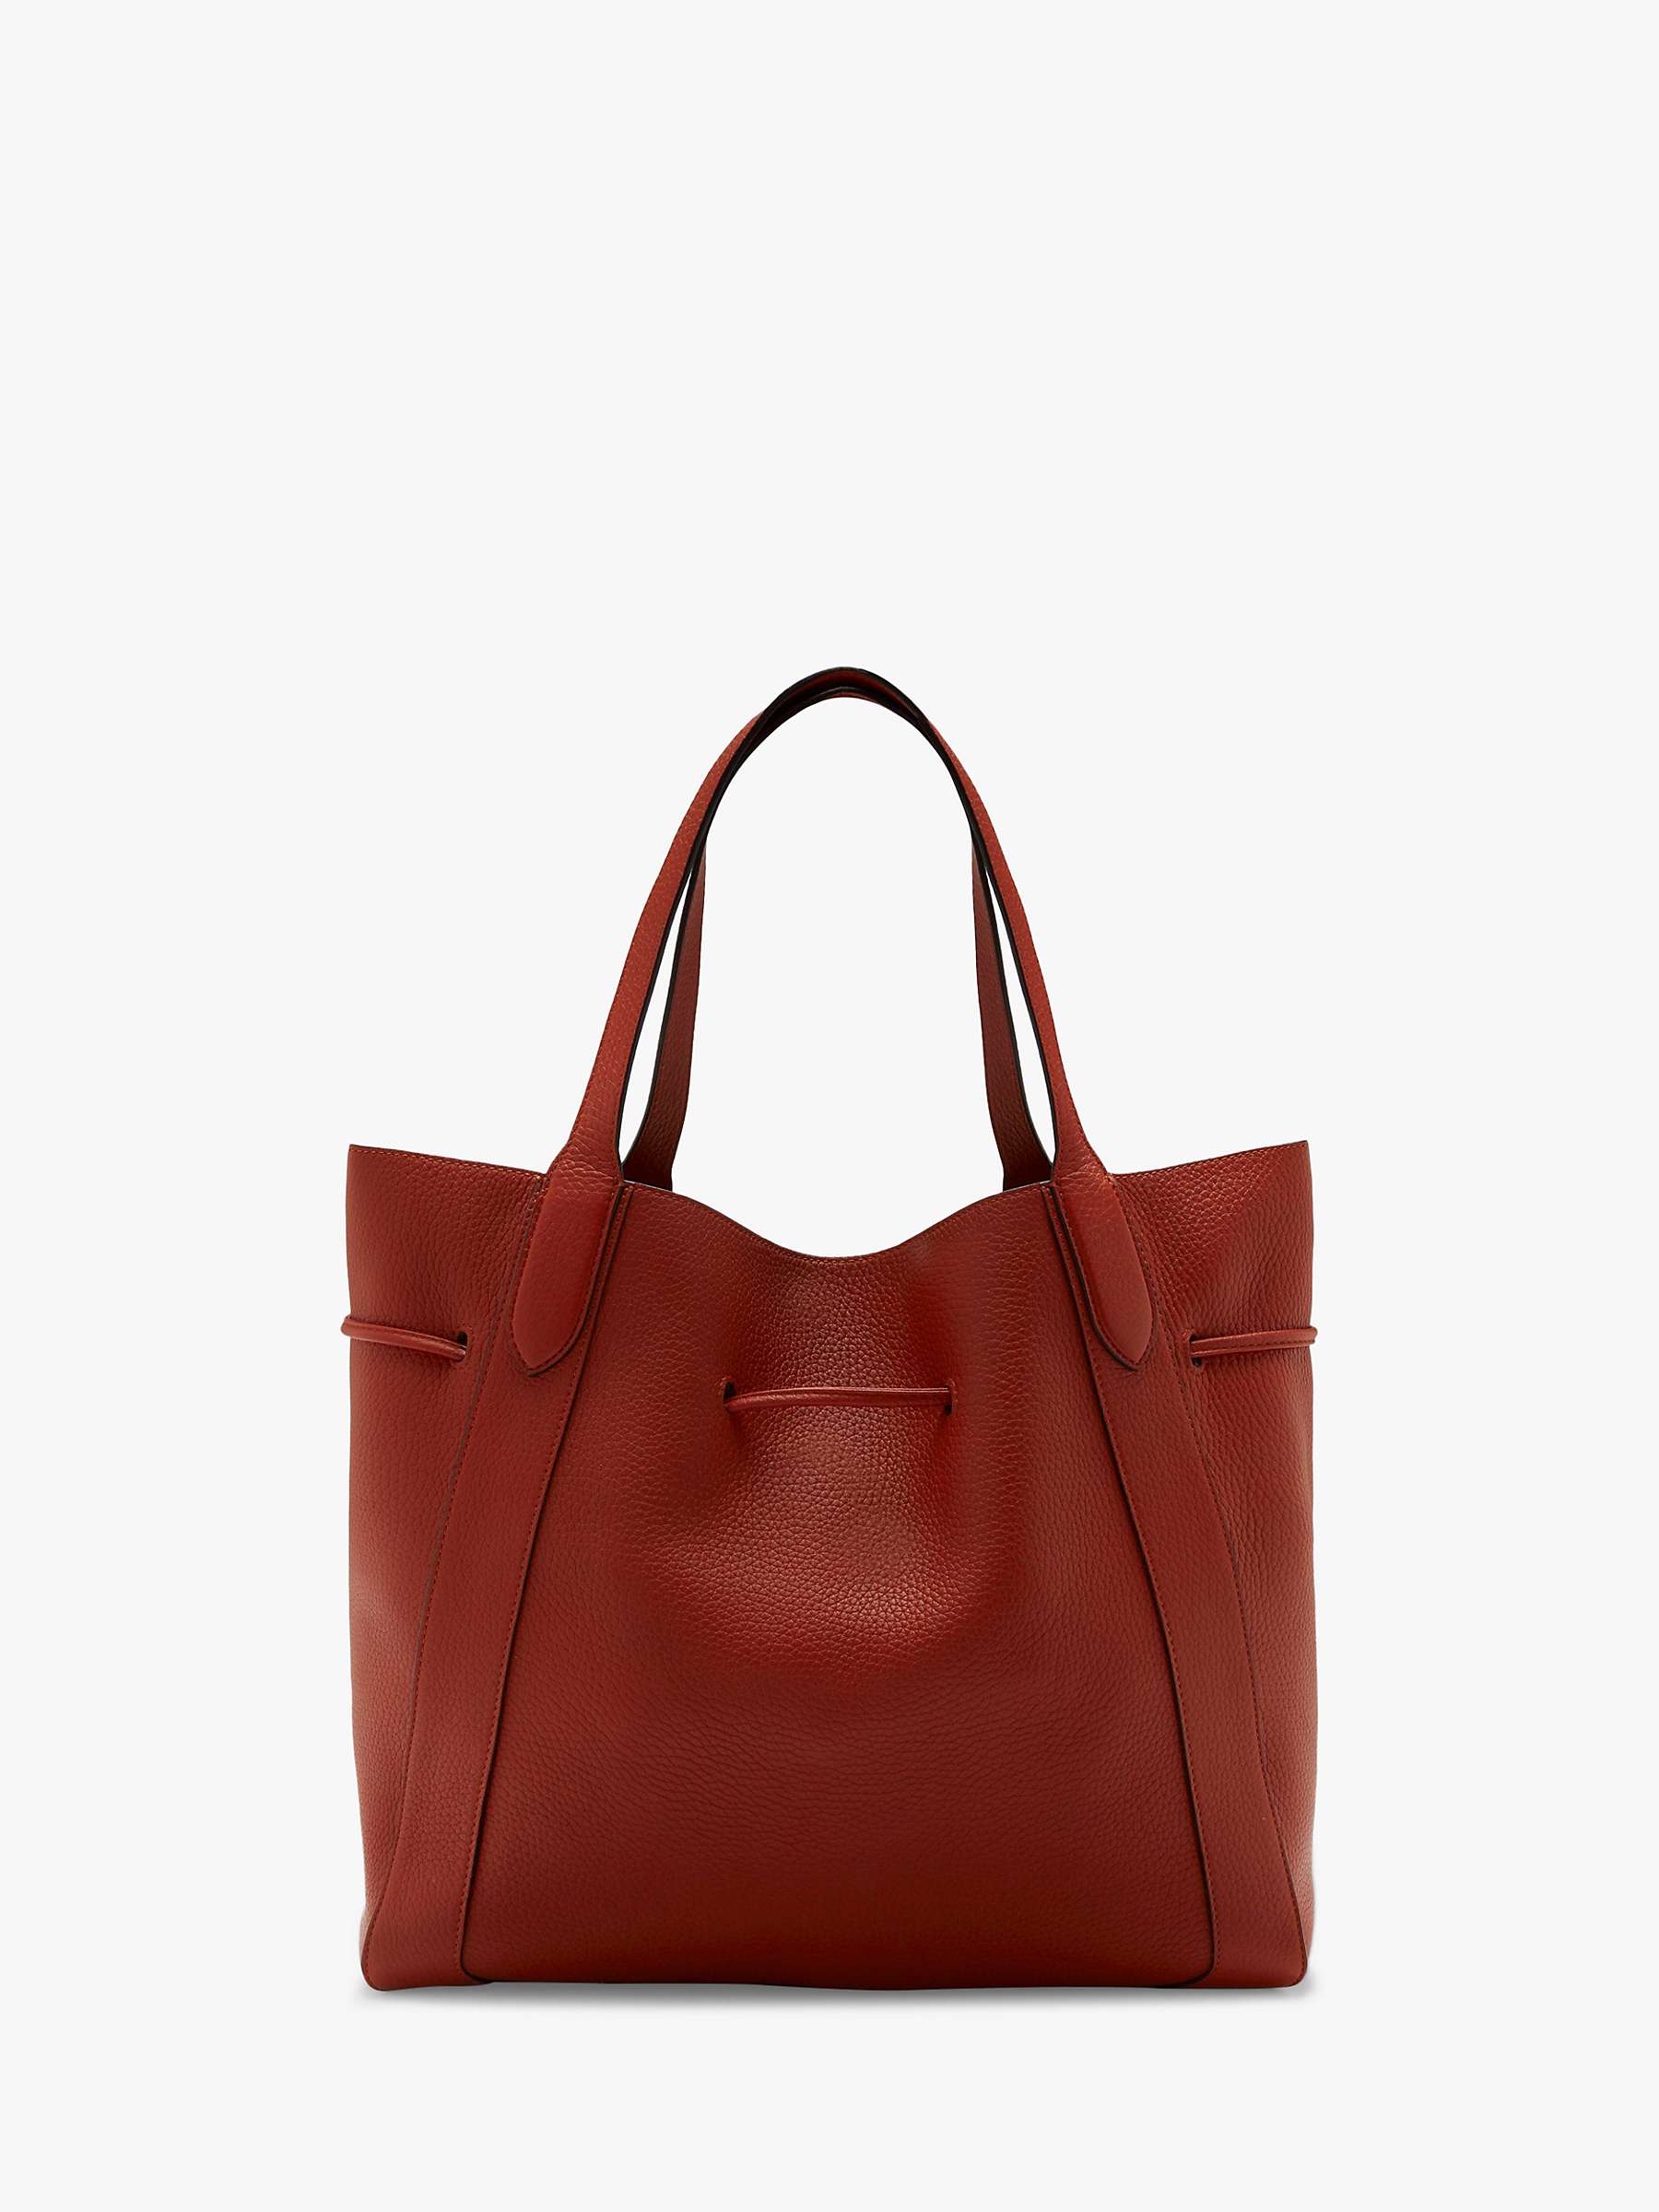 Mulberry Millie Heavy Grain Leather Tote Bag, Rust at John Lewis & Partners